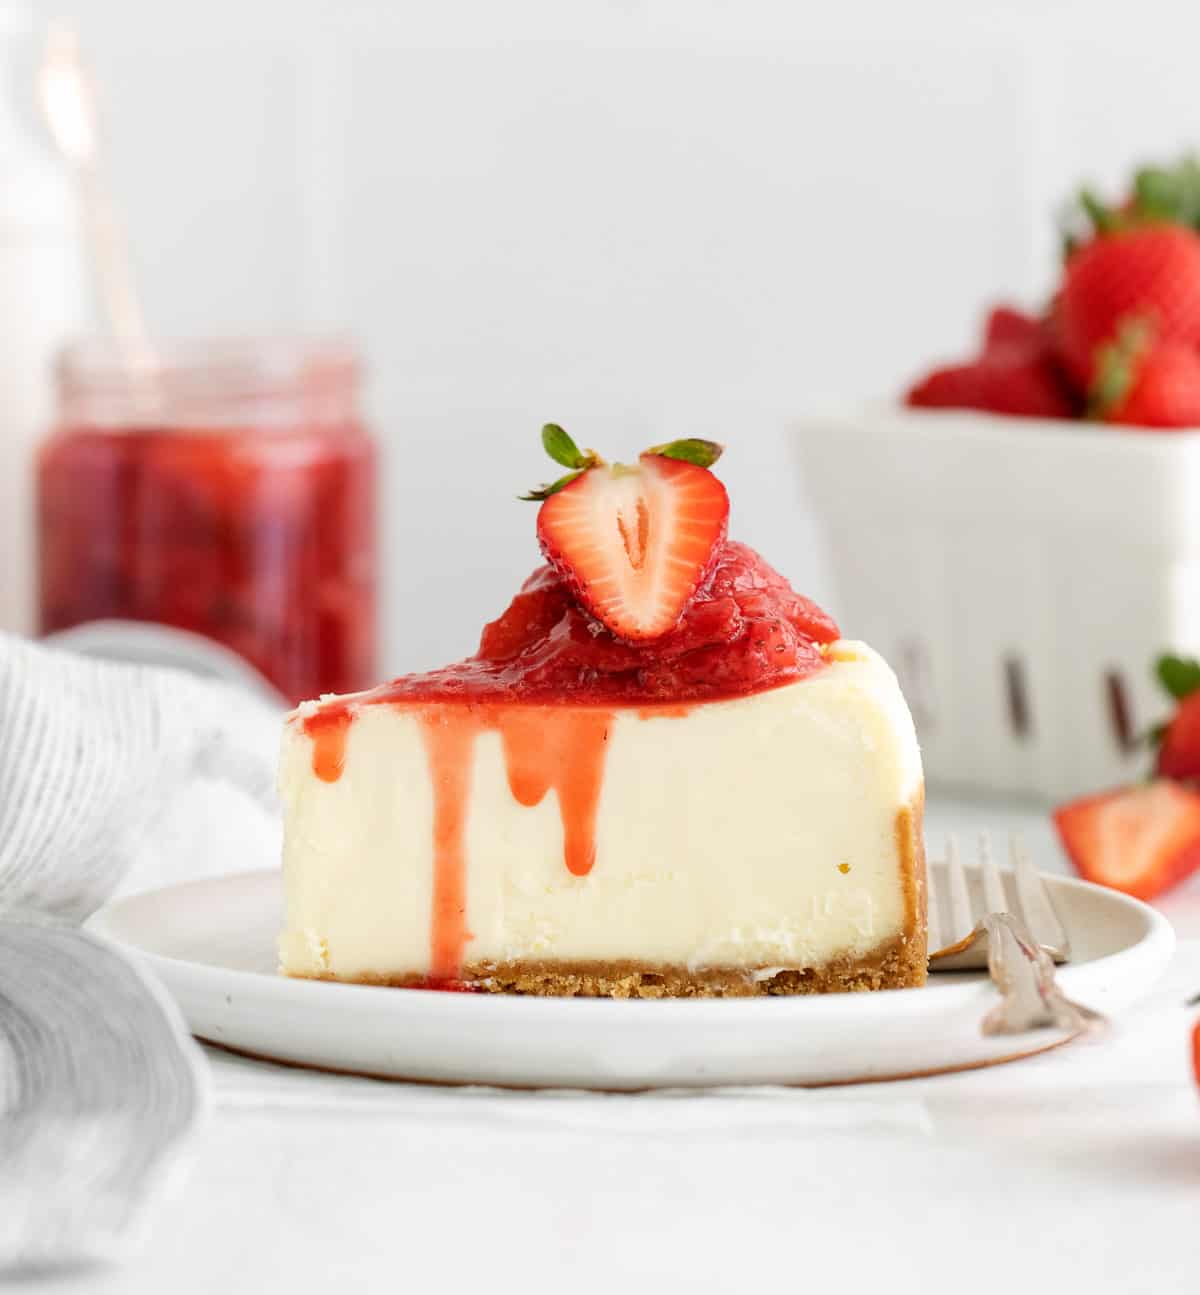 A slice of cheesecake with strawberry compote on top